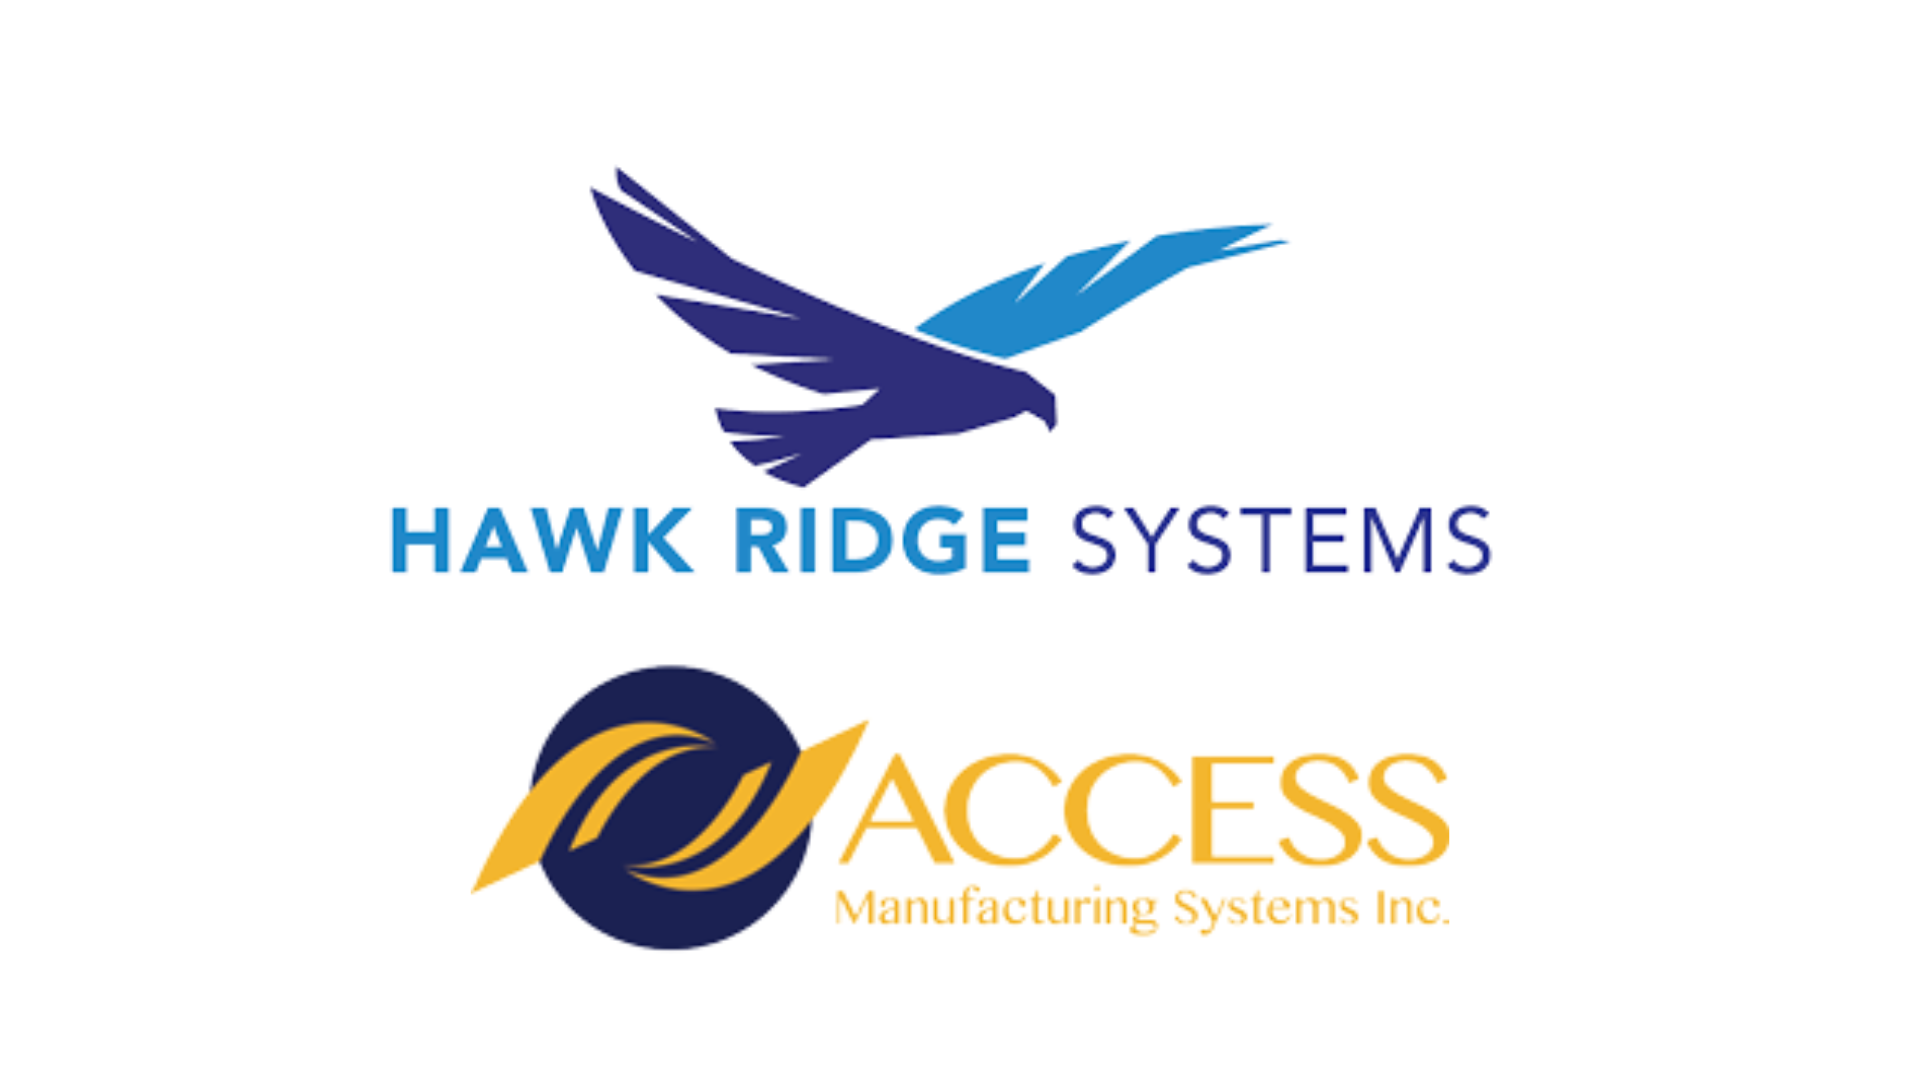 Hawk Ridge Systems has acquired ACCESS Manufacturing Systems, Inc. as part of a strategic initiative to expand manufacturing services and solutions.